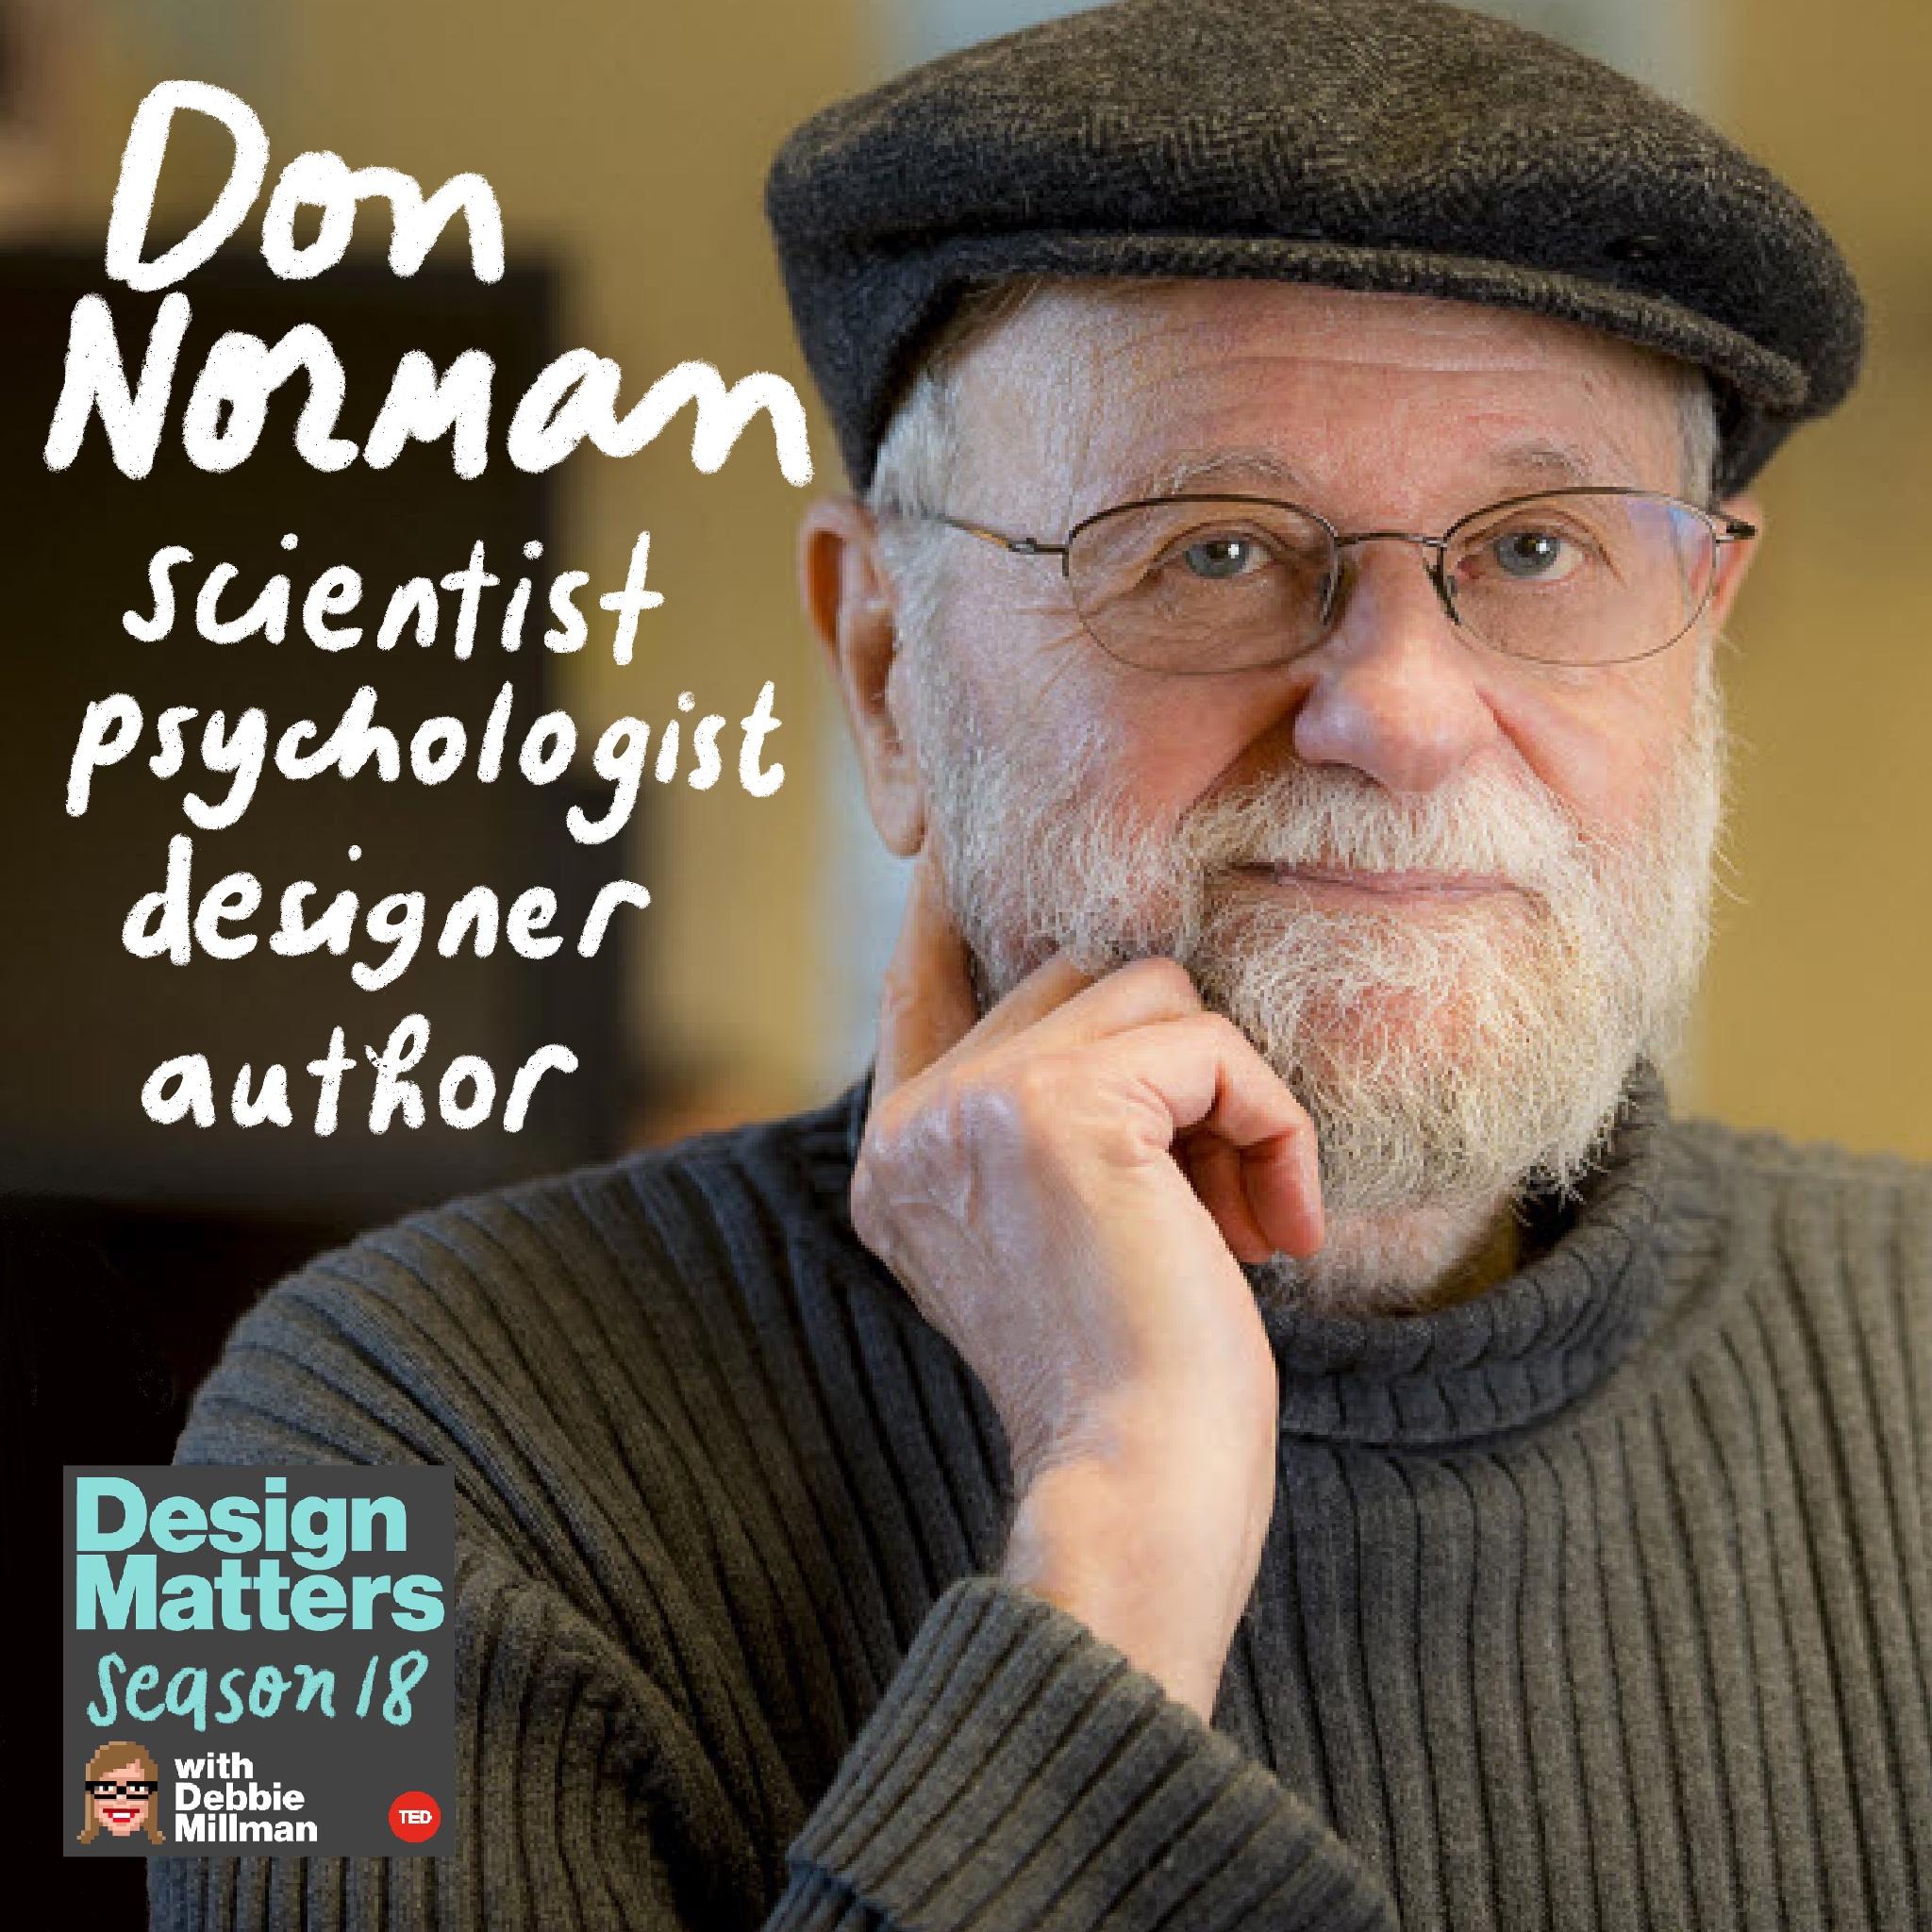 Thumbnail for "Don Norman".